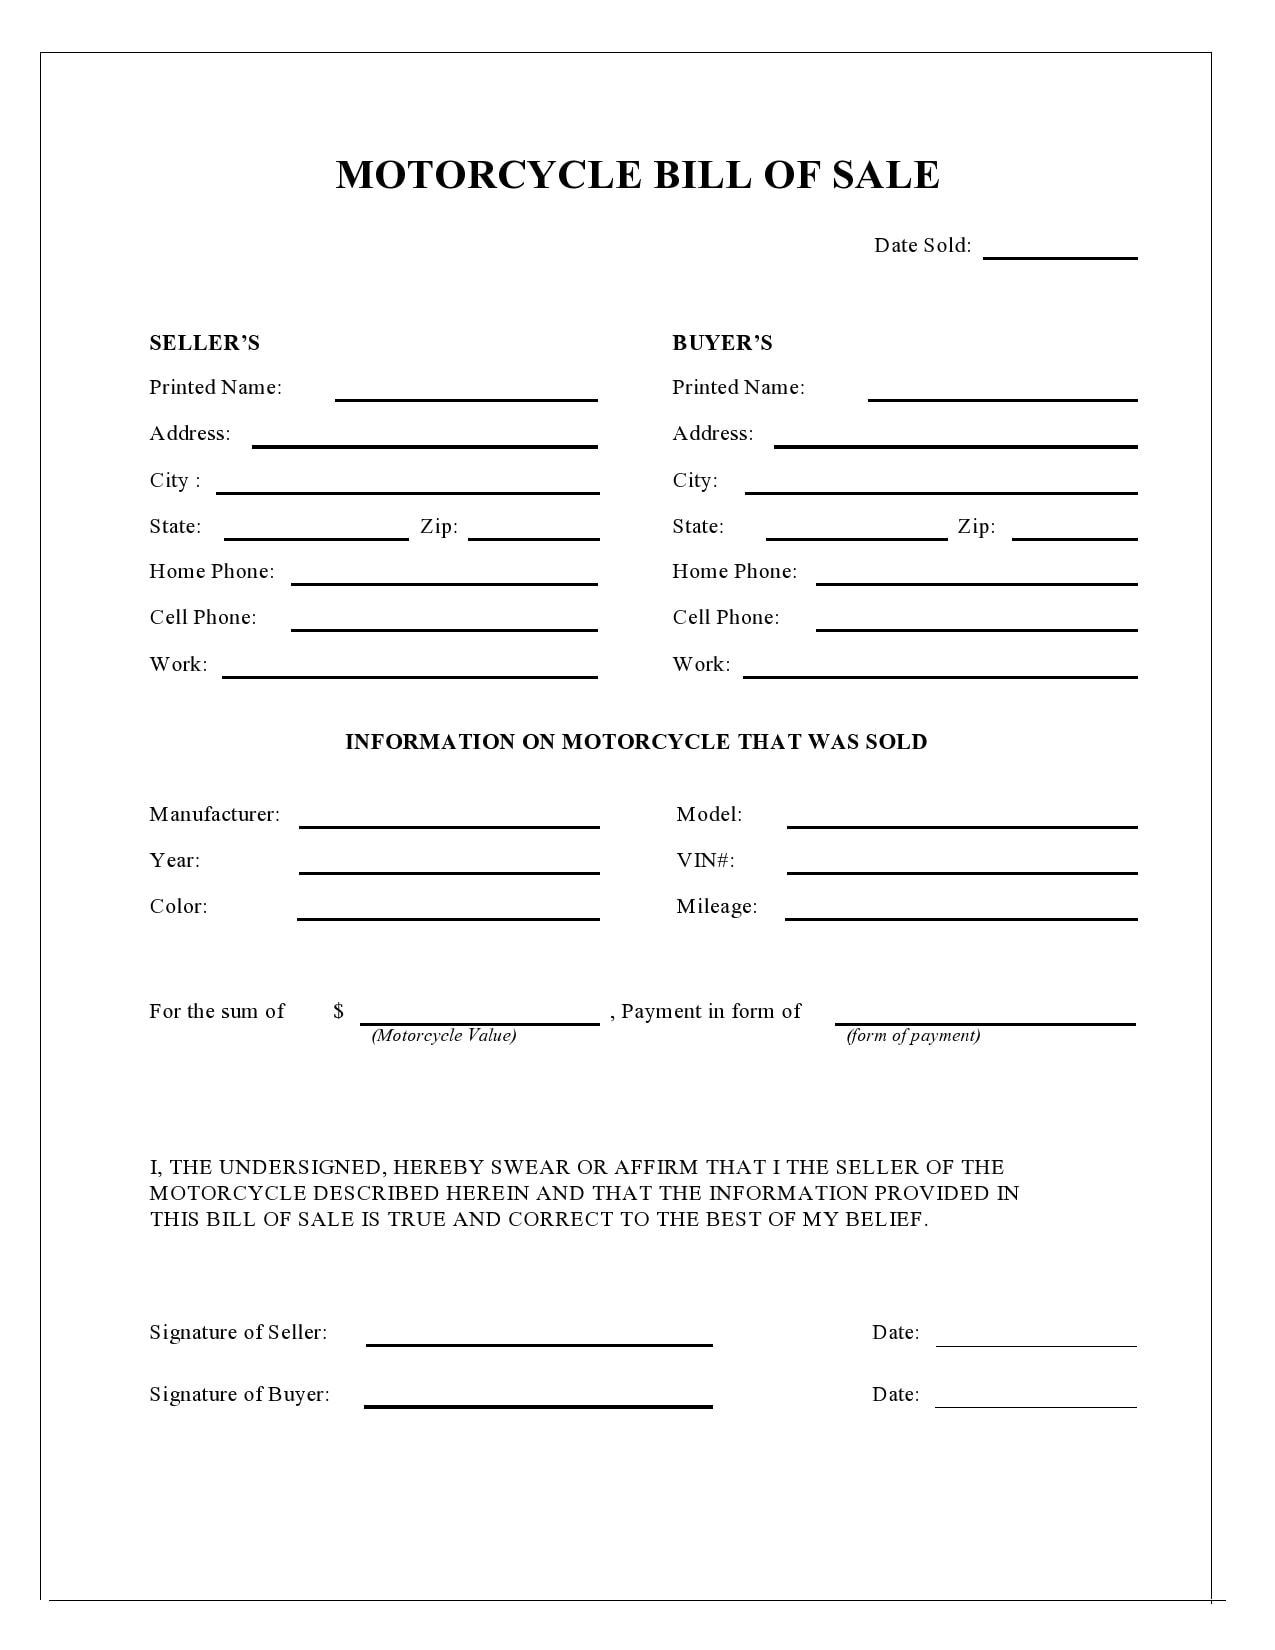 29 Printable Motorcycle Bill Of Sale Forms Free Templatearchive